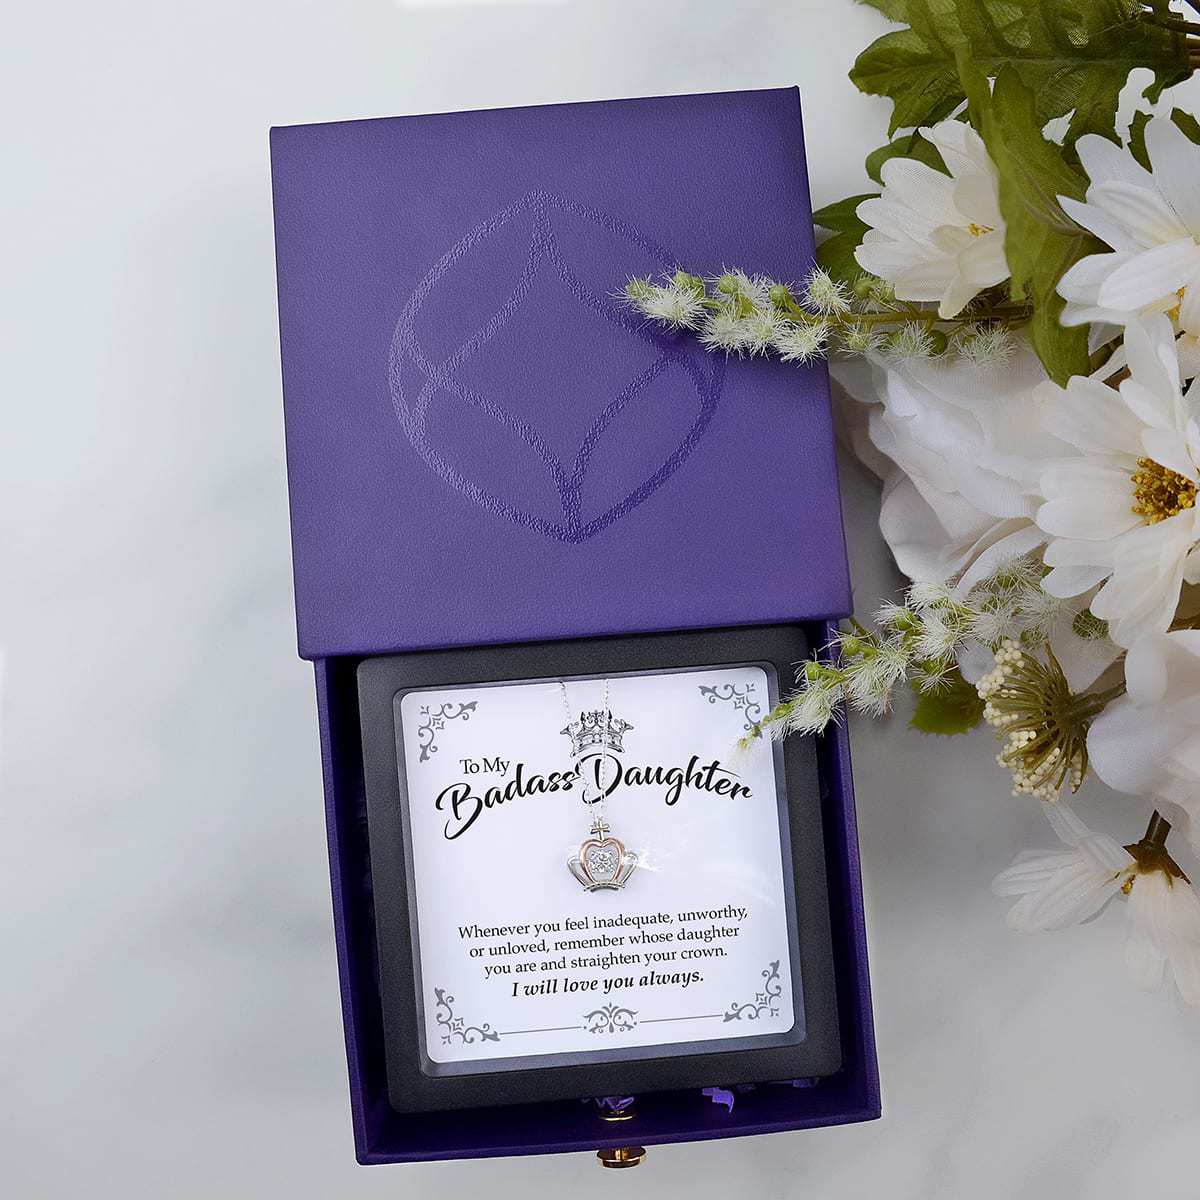 Mini Magic in a Box - Deluxe Purple Gift Box Set (Jewelry Sold Separately)